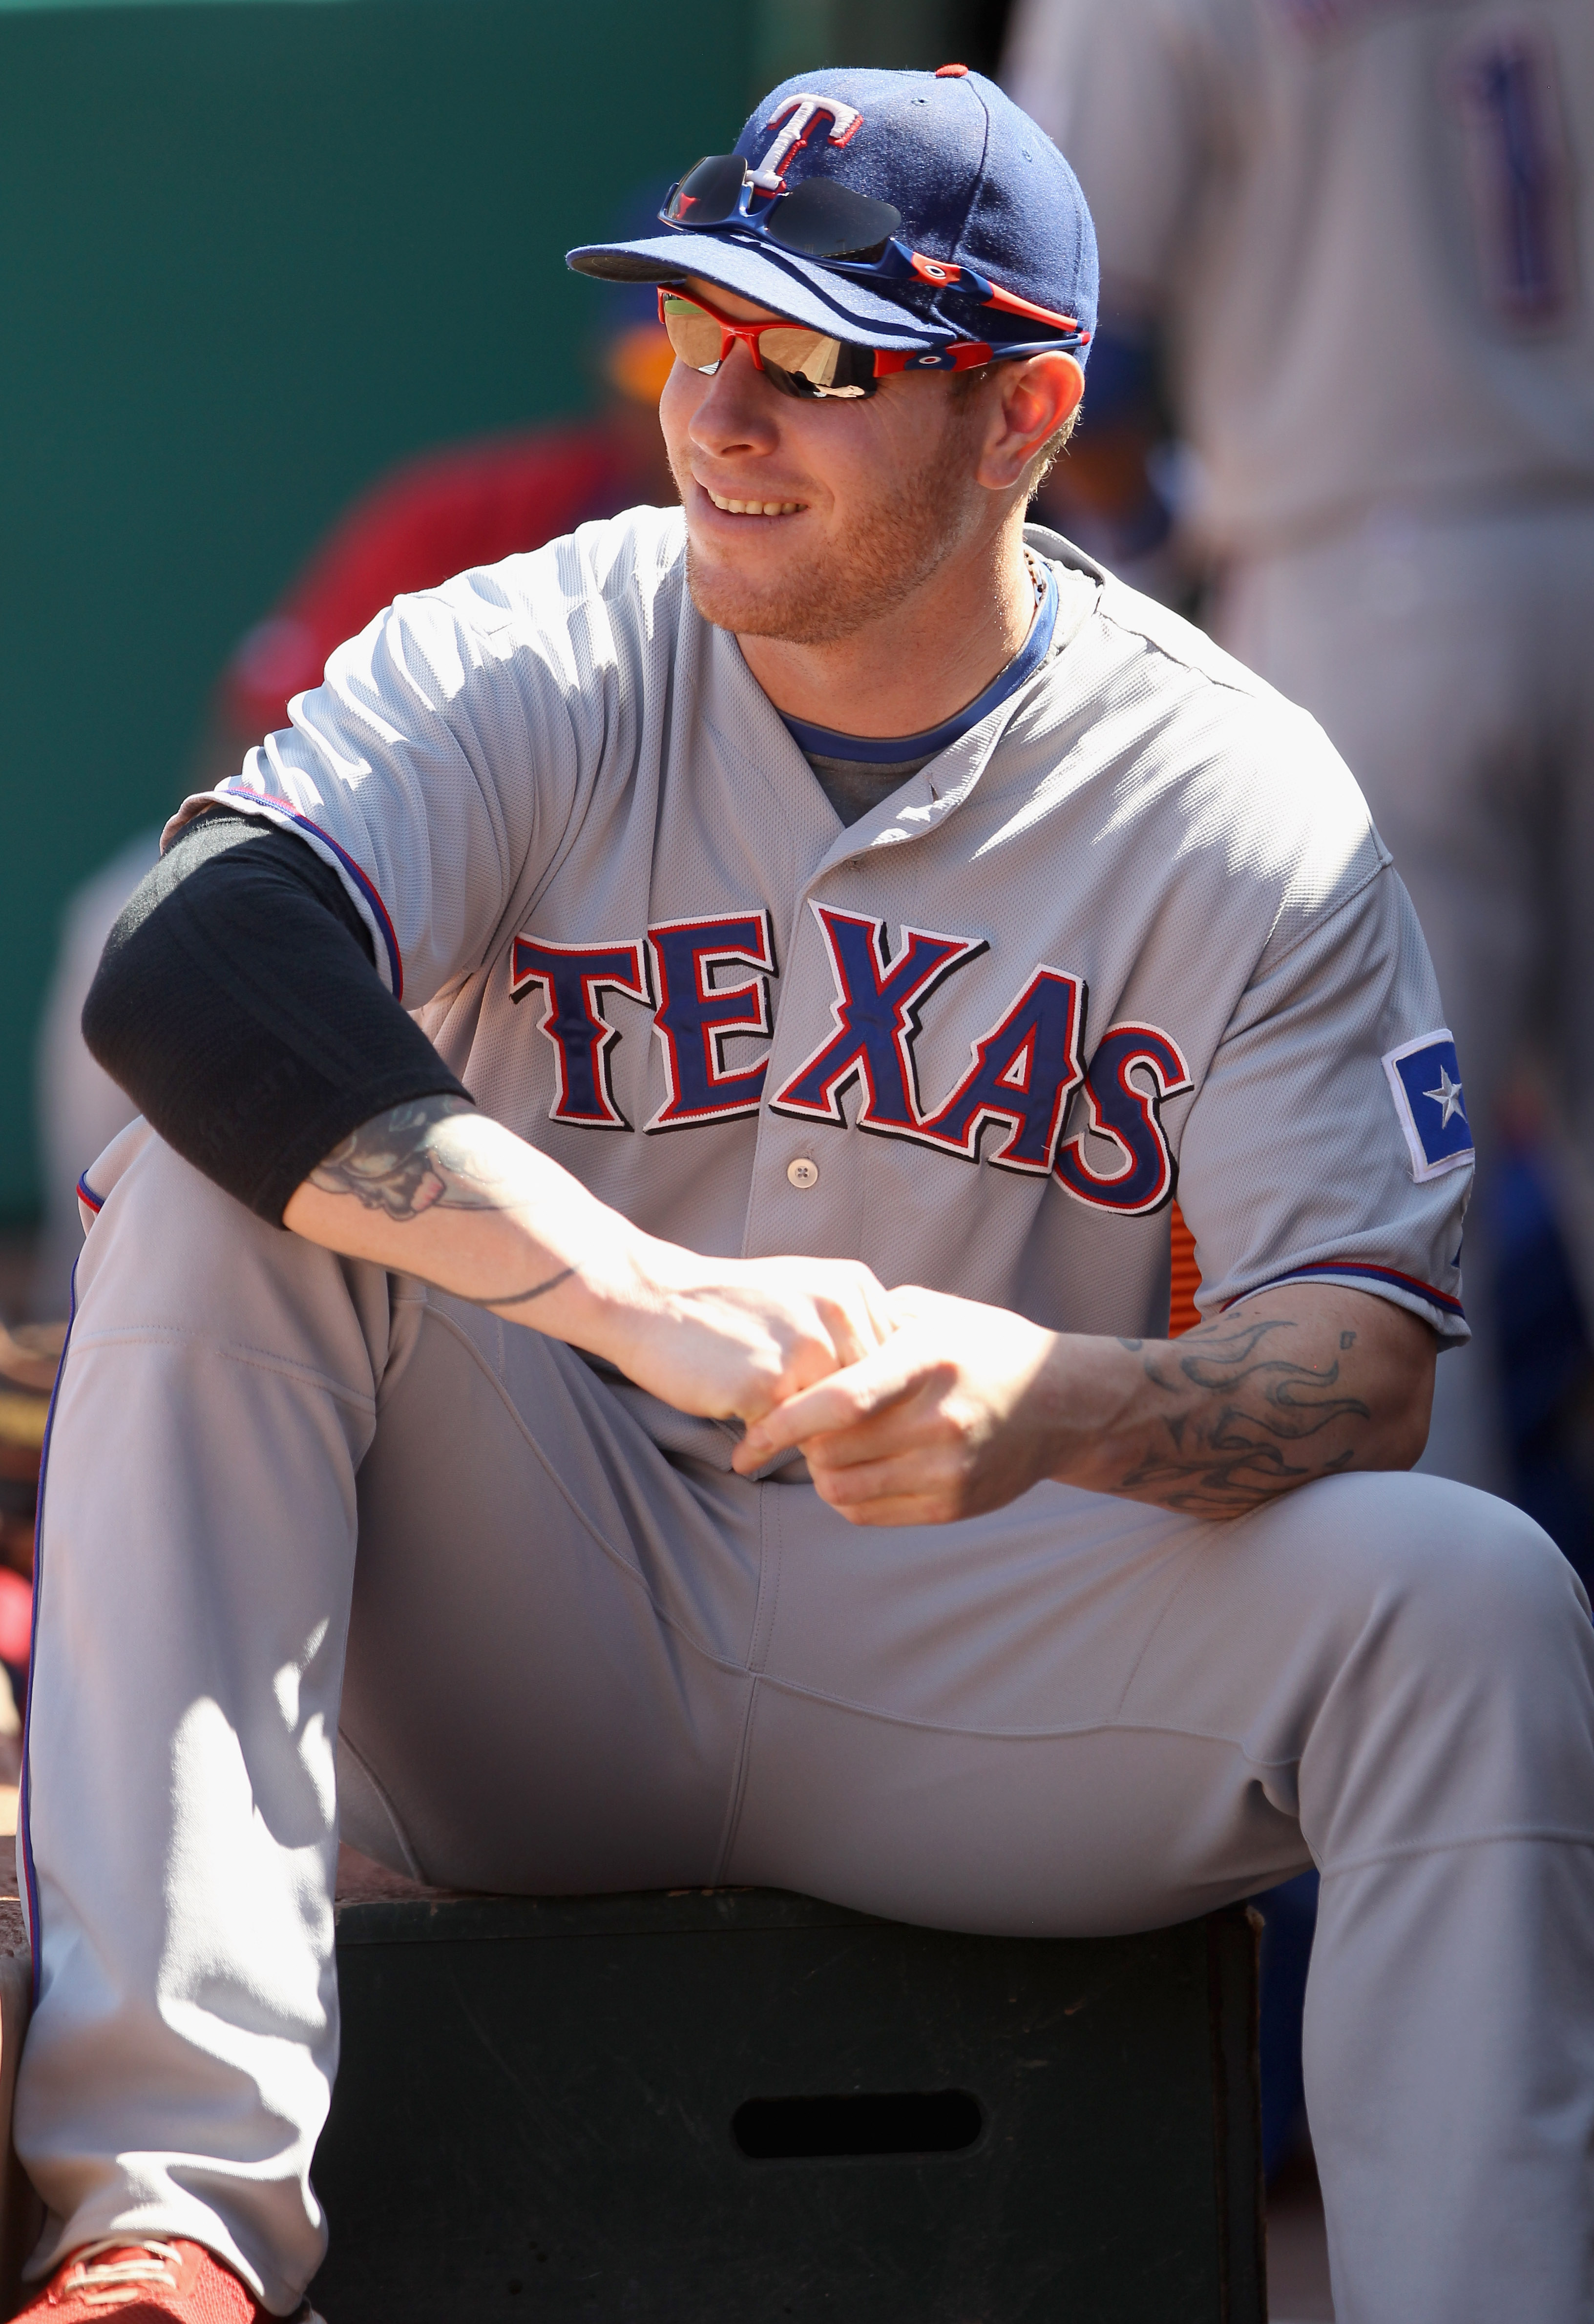 OAKLAND, CA - SEPTEMBER 25:  Josh Hamilton #32 of the Texas Rangers sits in the dugout before their game against the Oakland Athletics at the Oakland-Alameda County Coliseum on September 25, 2010 in Oakland, California.  (Photo by Ezra Shaw/Getty Images)